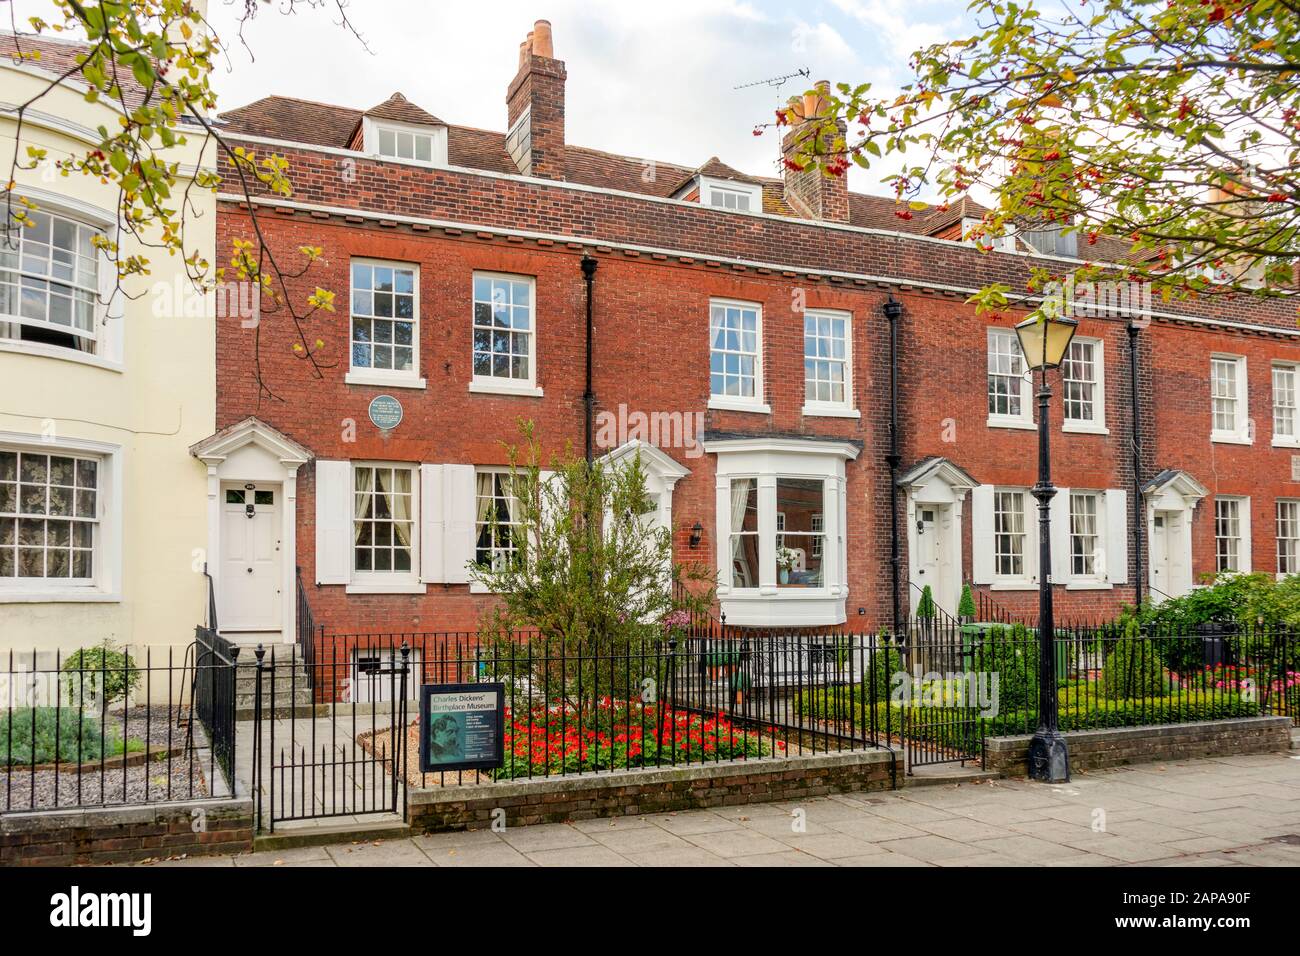 Portsmouth, Great Britain - October 2, 2019: Charles Dickens' Birthplace Museum Stock Photo